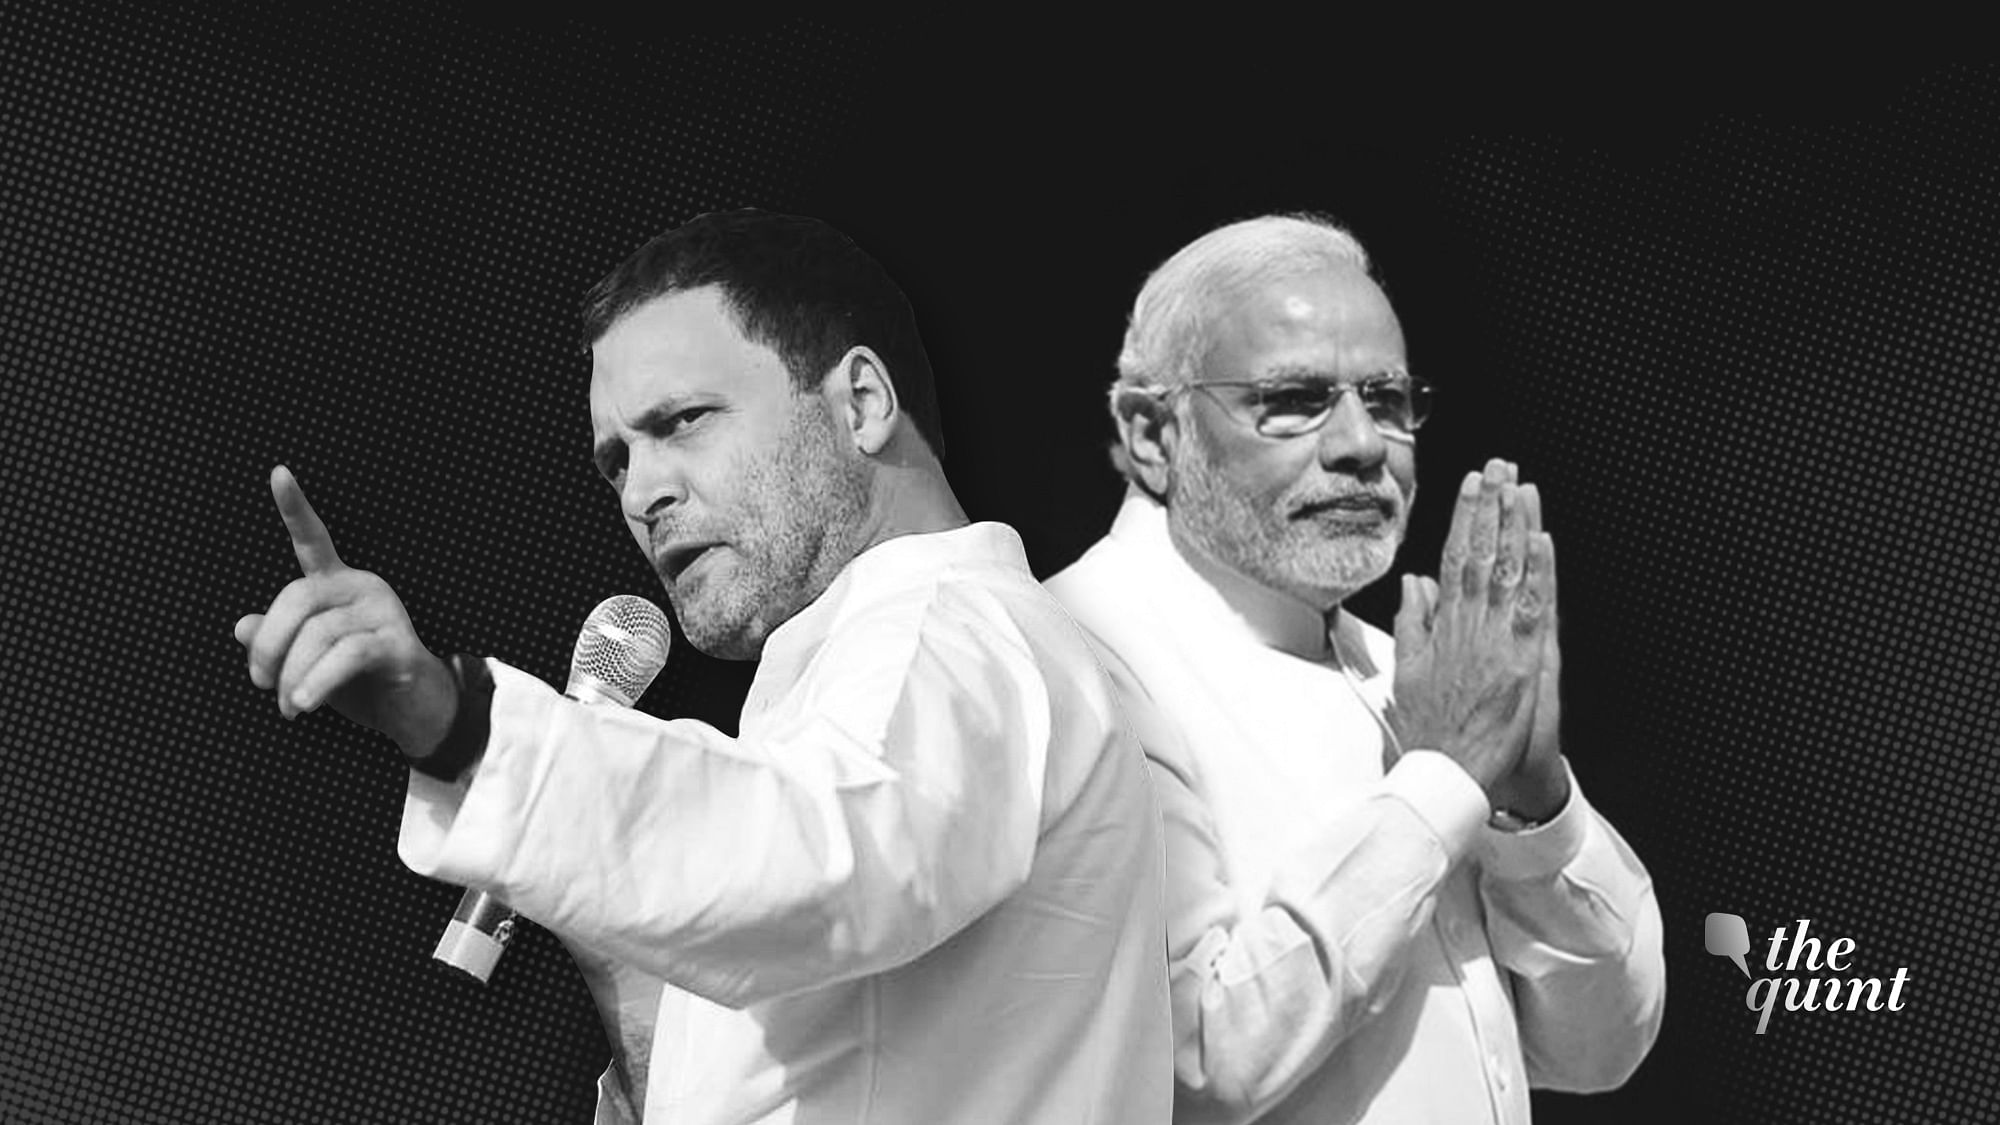 Rahul Gandhi took a swipe at PM Modi over the state of the economy, saying it seems that it is not too good.